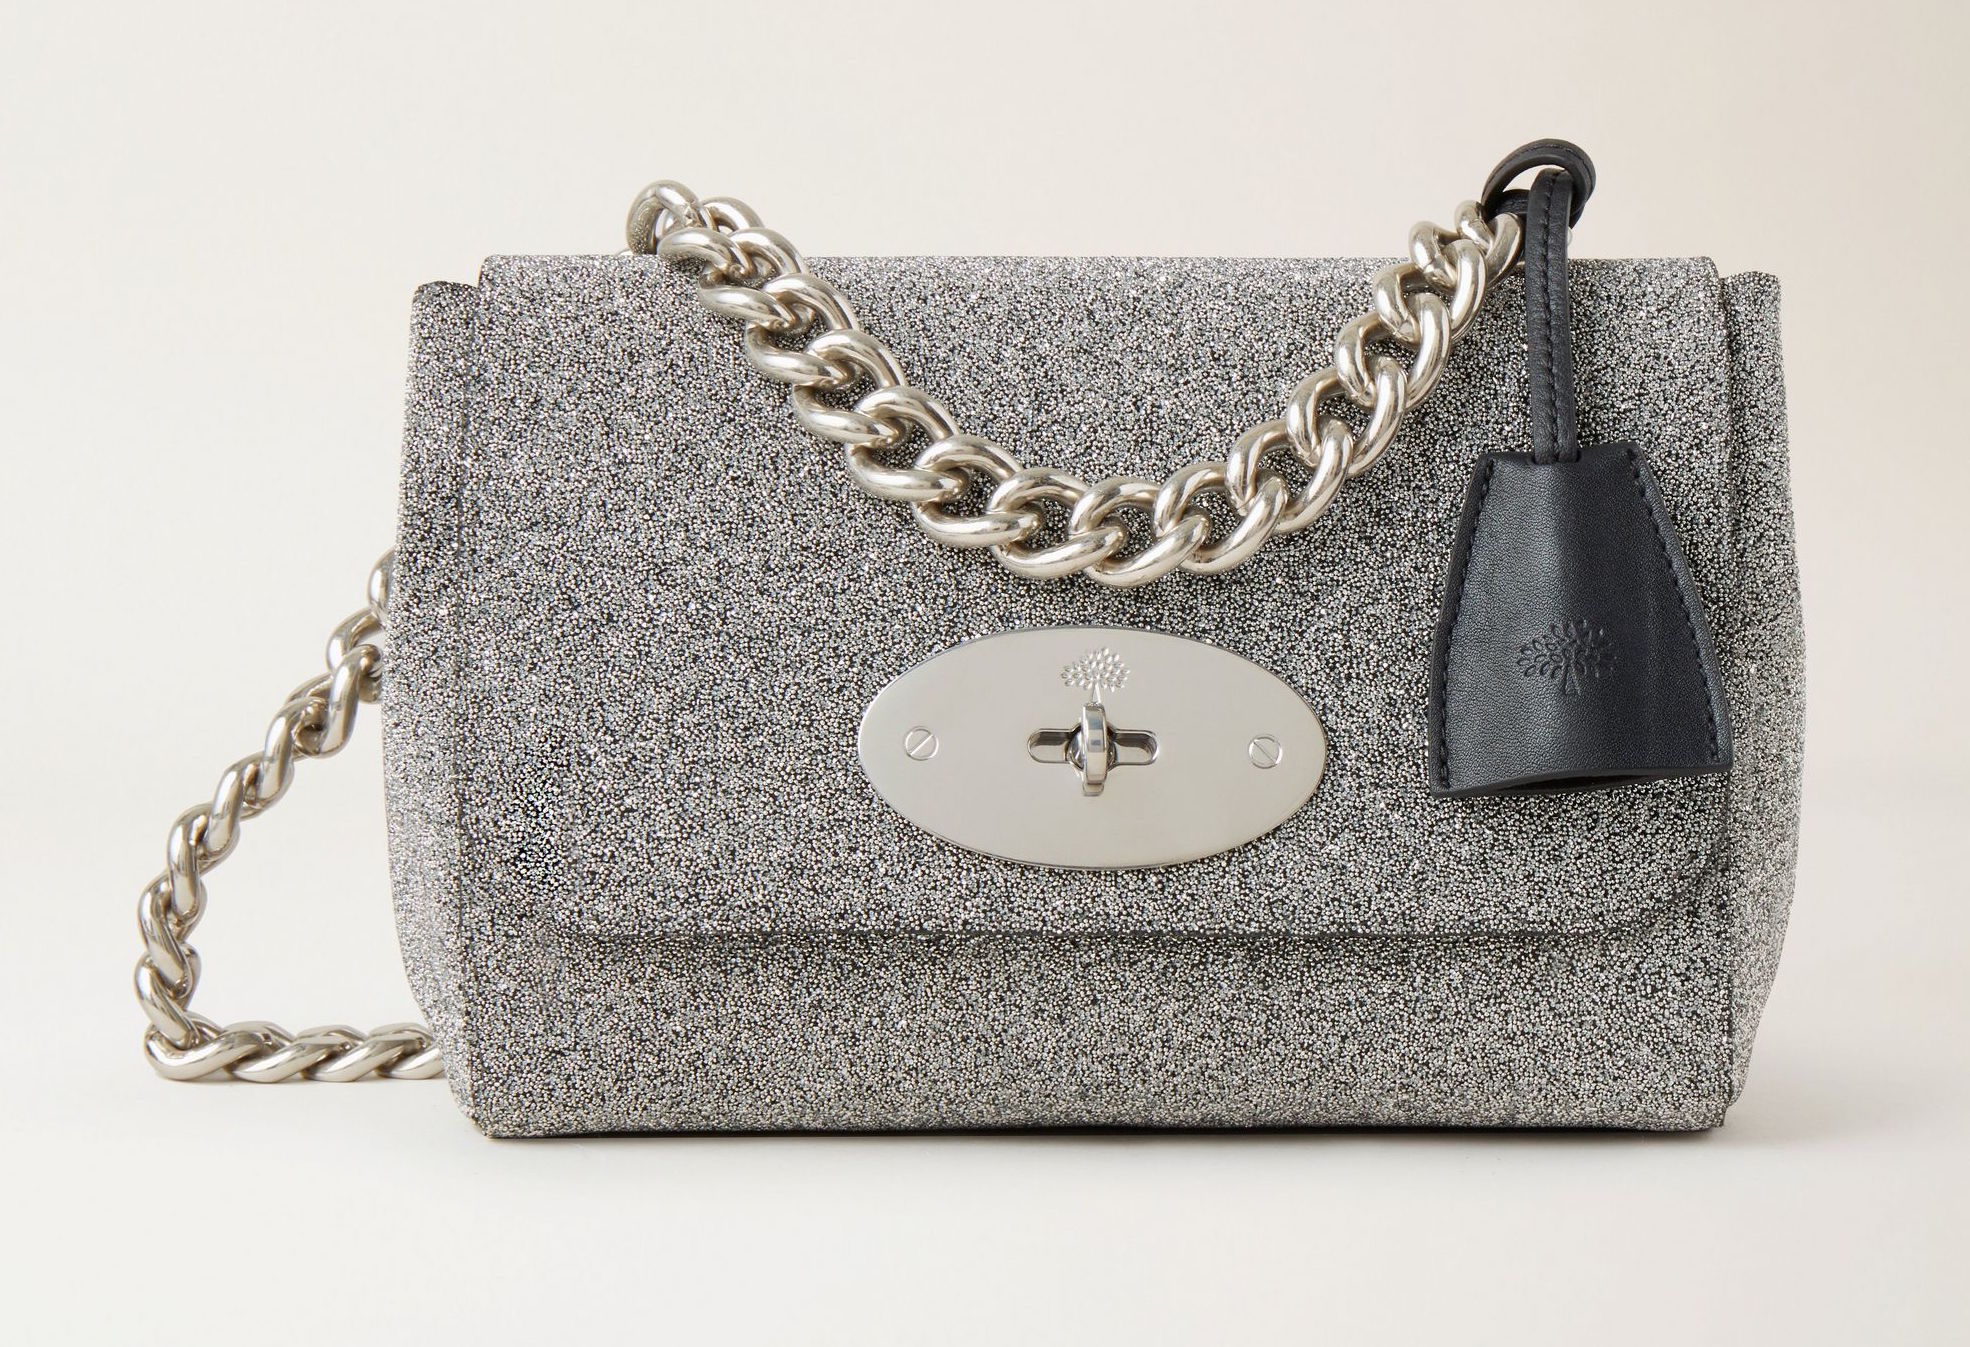 Mulberry Lily Bag Ultimate Buying Guide – Every Size, Style & More